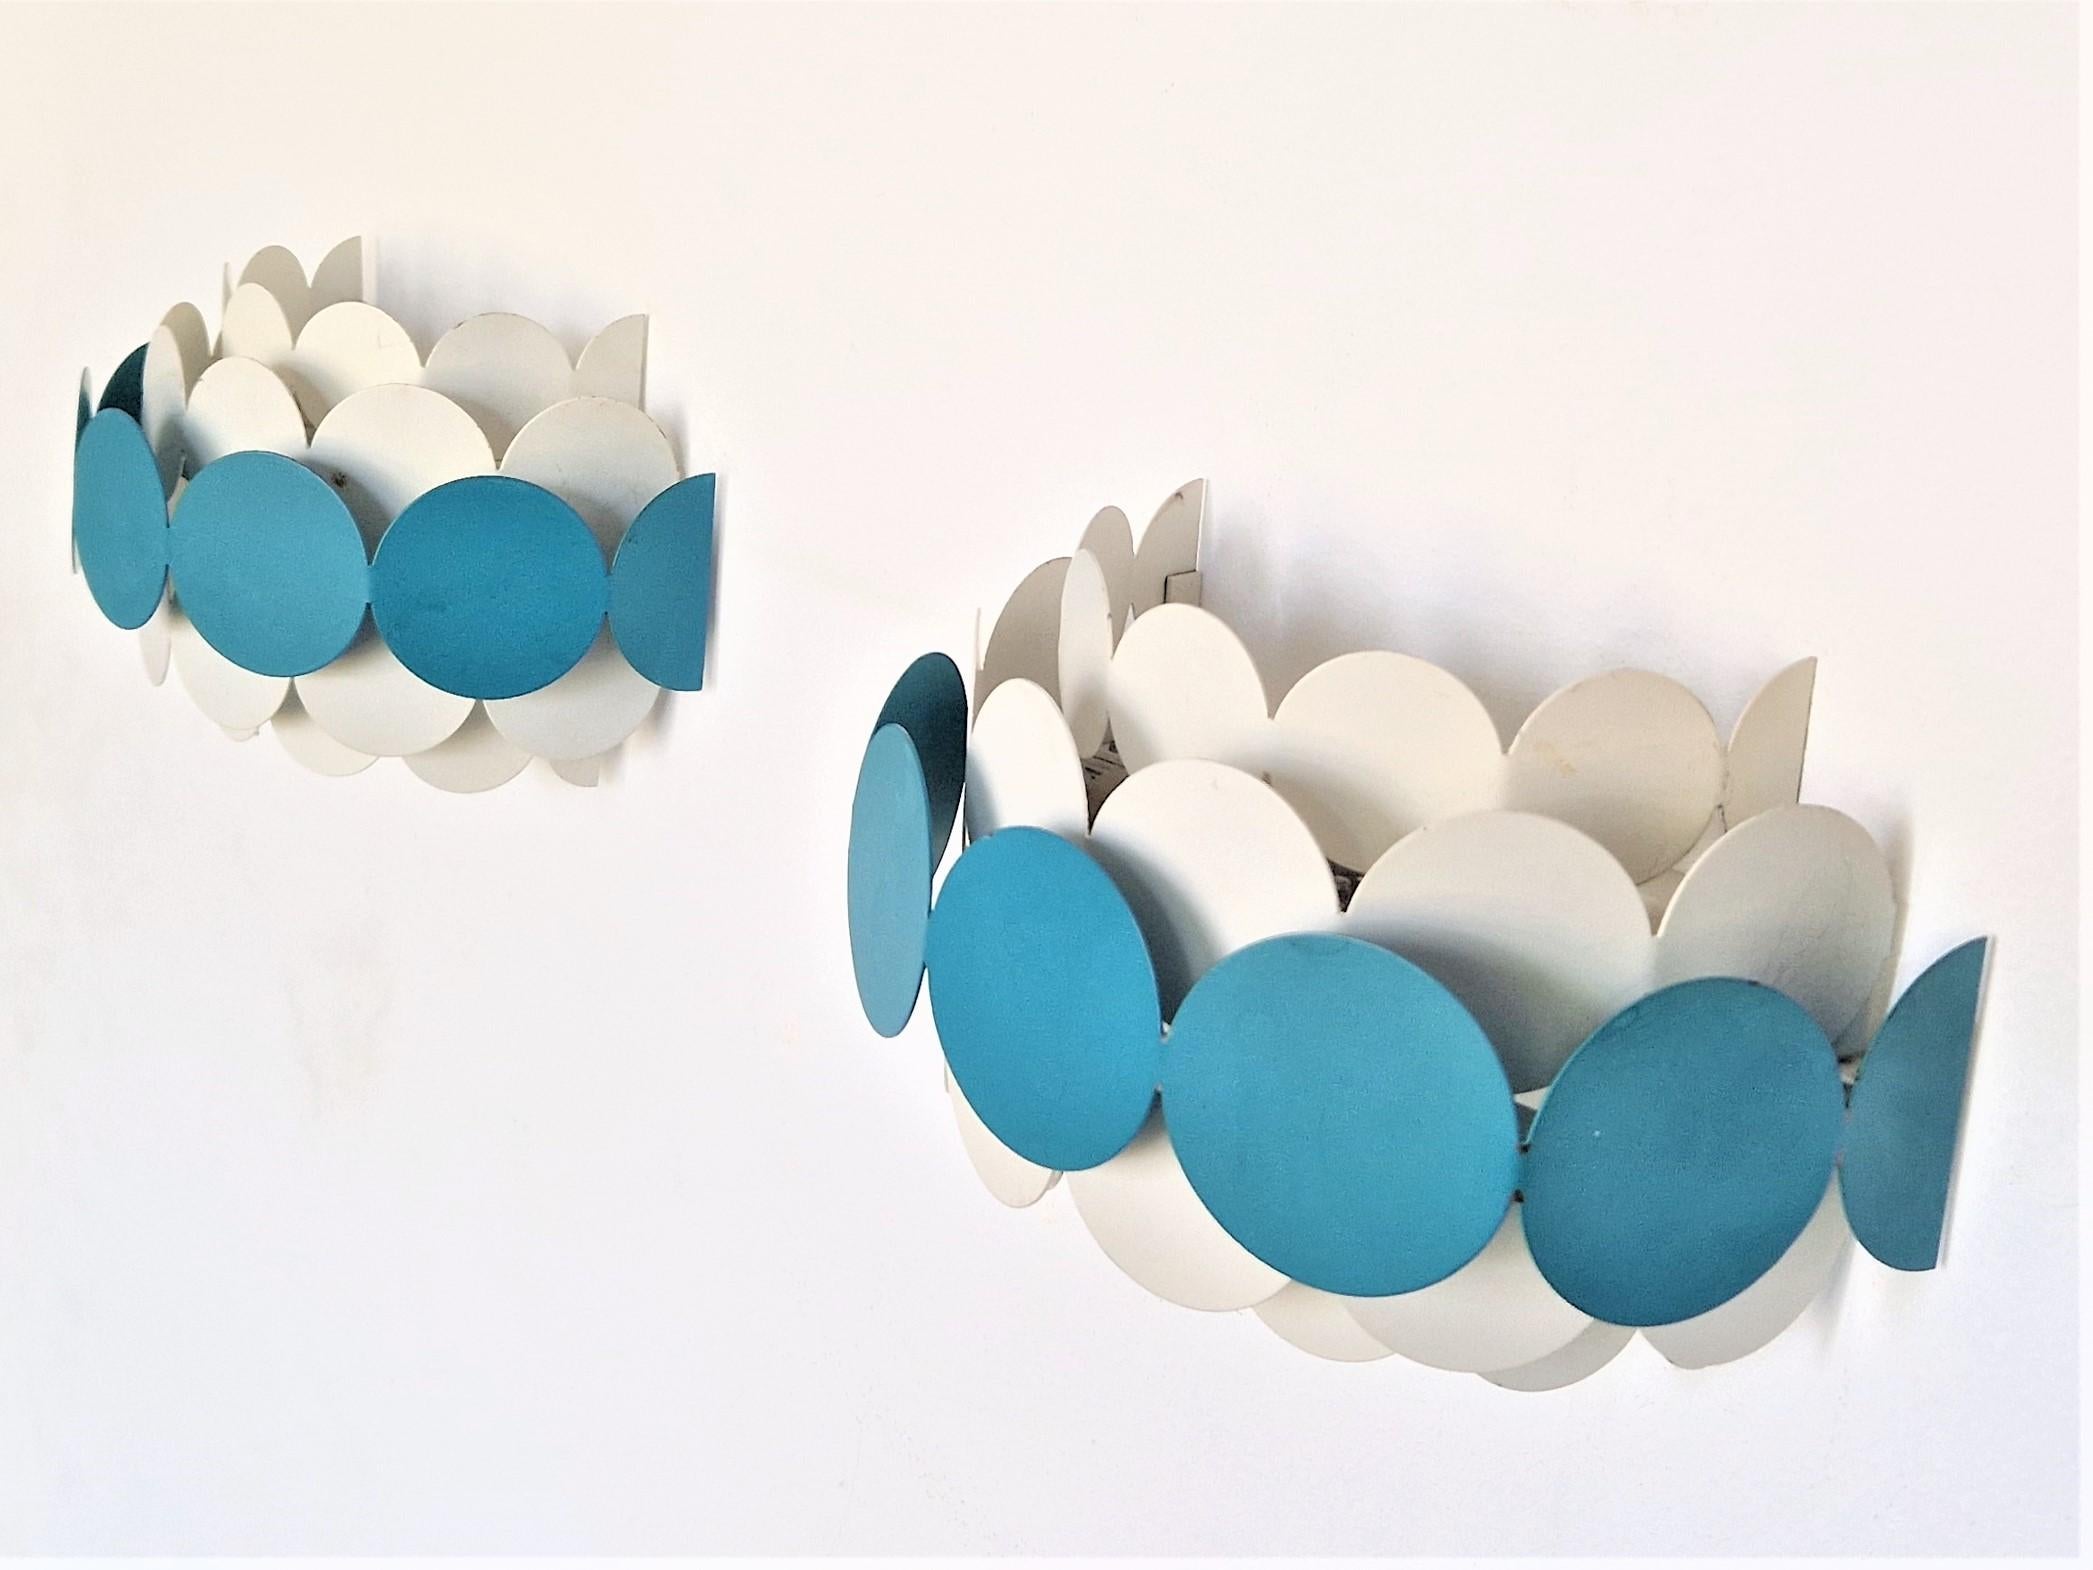 Bright Petrol and White Wall Lamps by Doria Leuchten, Germany 1960's/1970's In Good Condition For Sale In Steenwijk, NL